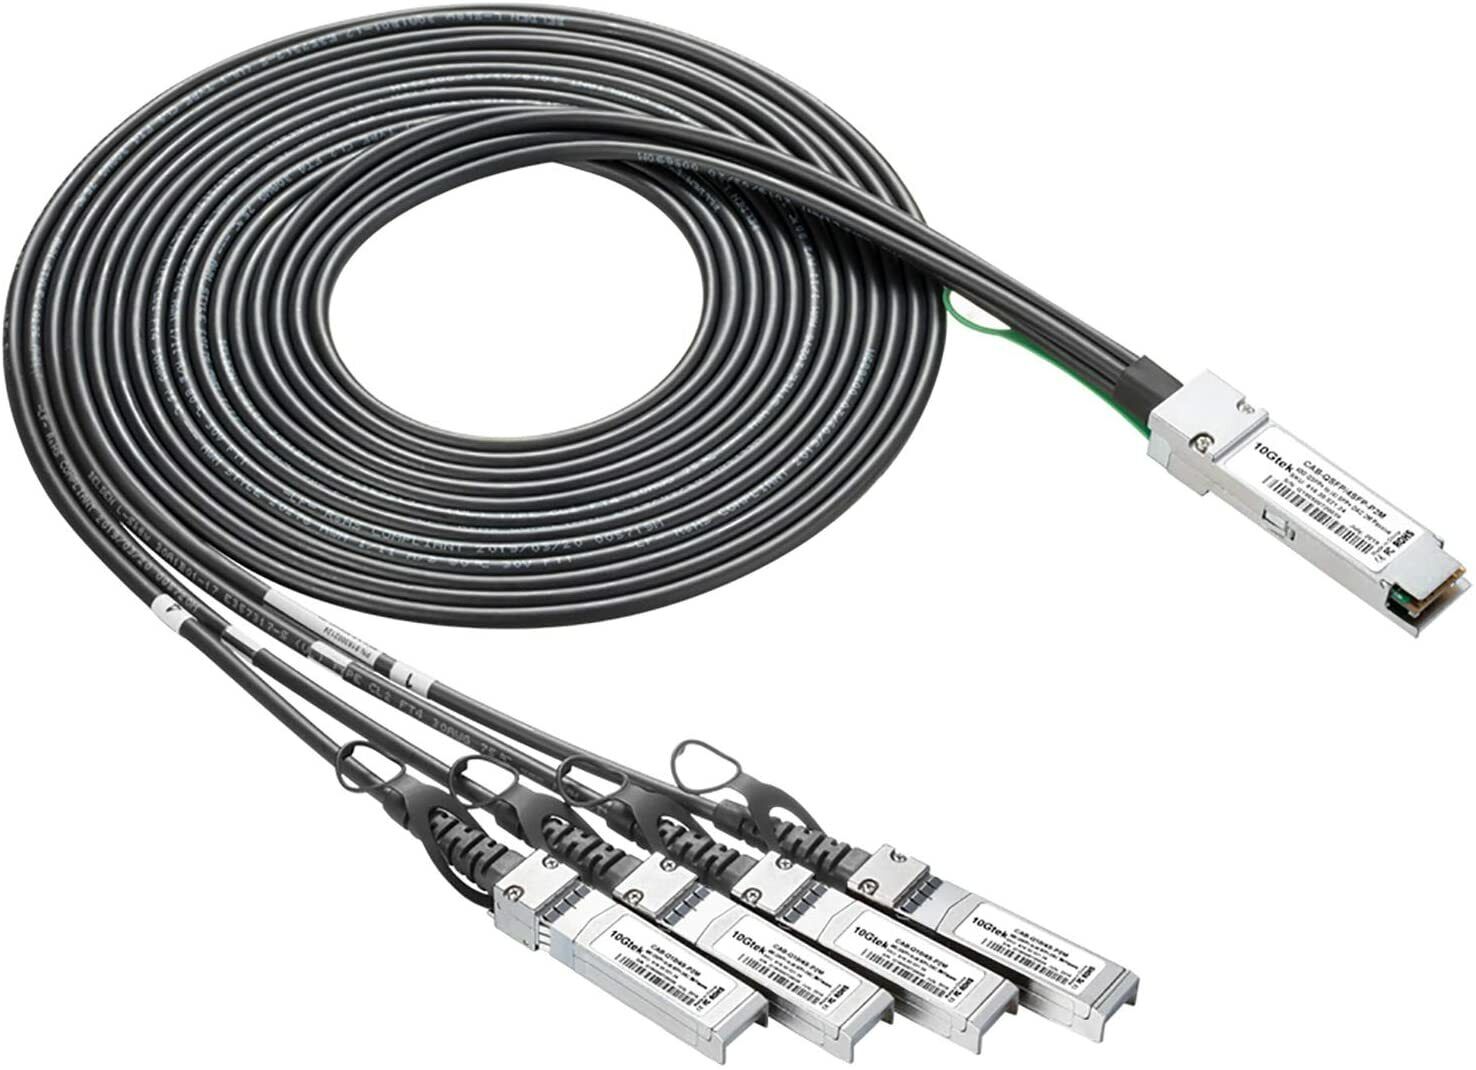 For Cisco QSFP-4SFP10G-CU1M 40G QSFP+ to 4xSFP+ Breakout DAC Cable 1 Meters